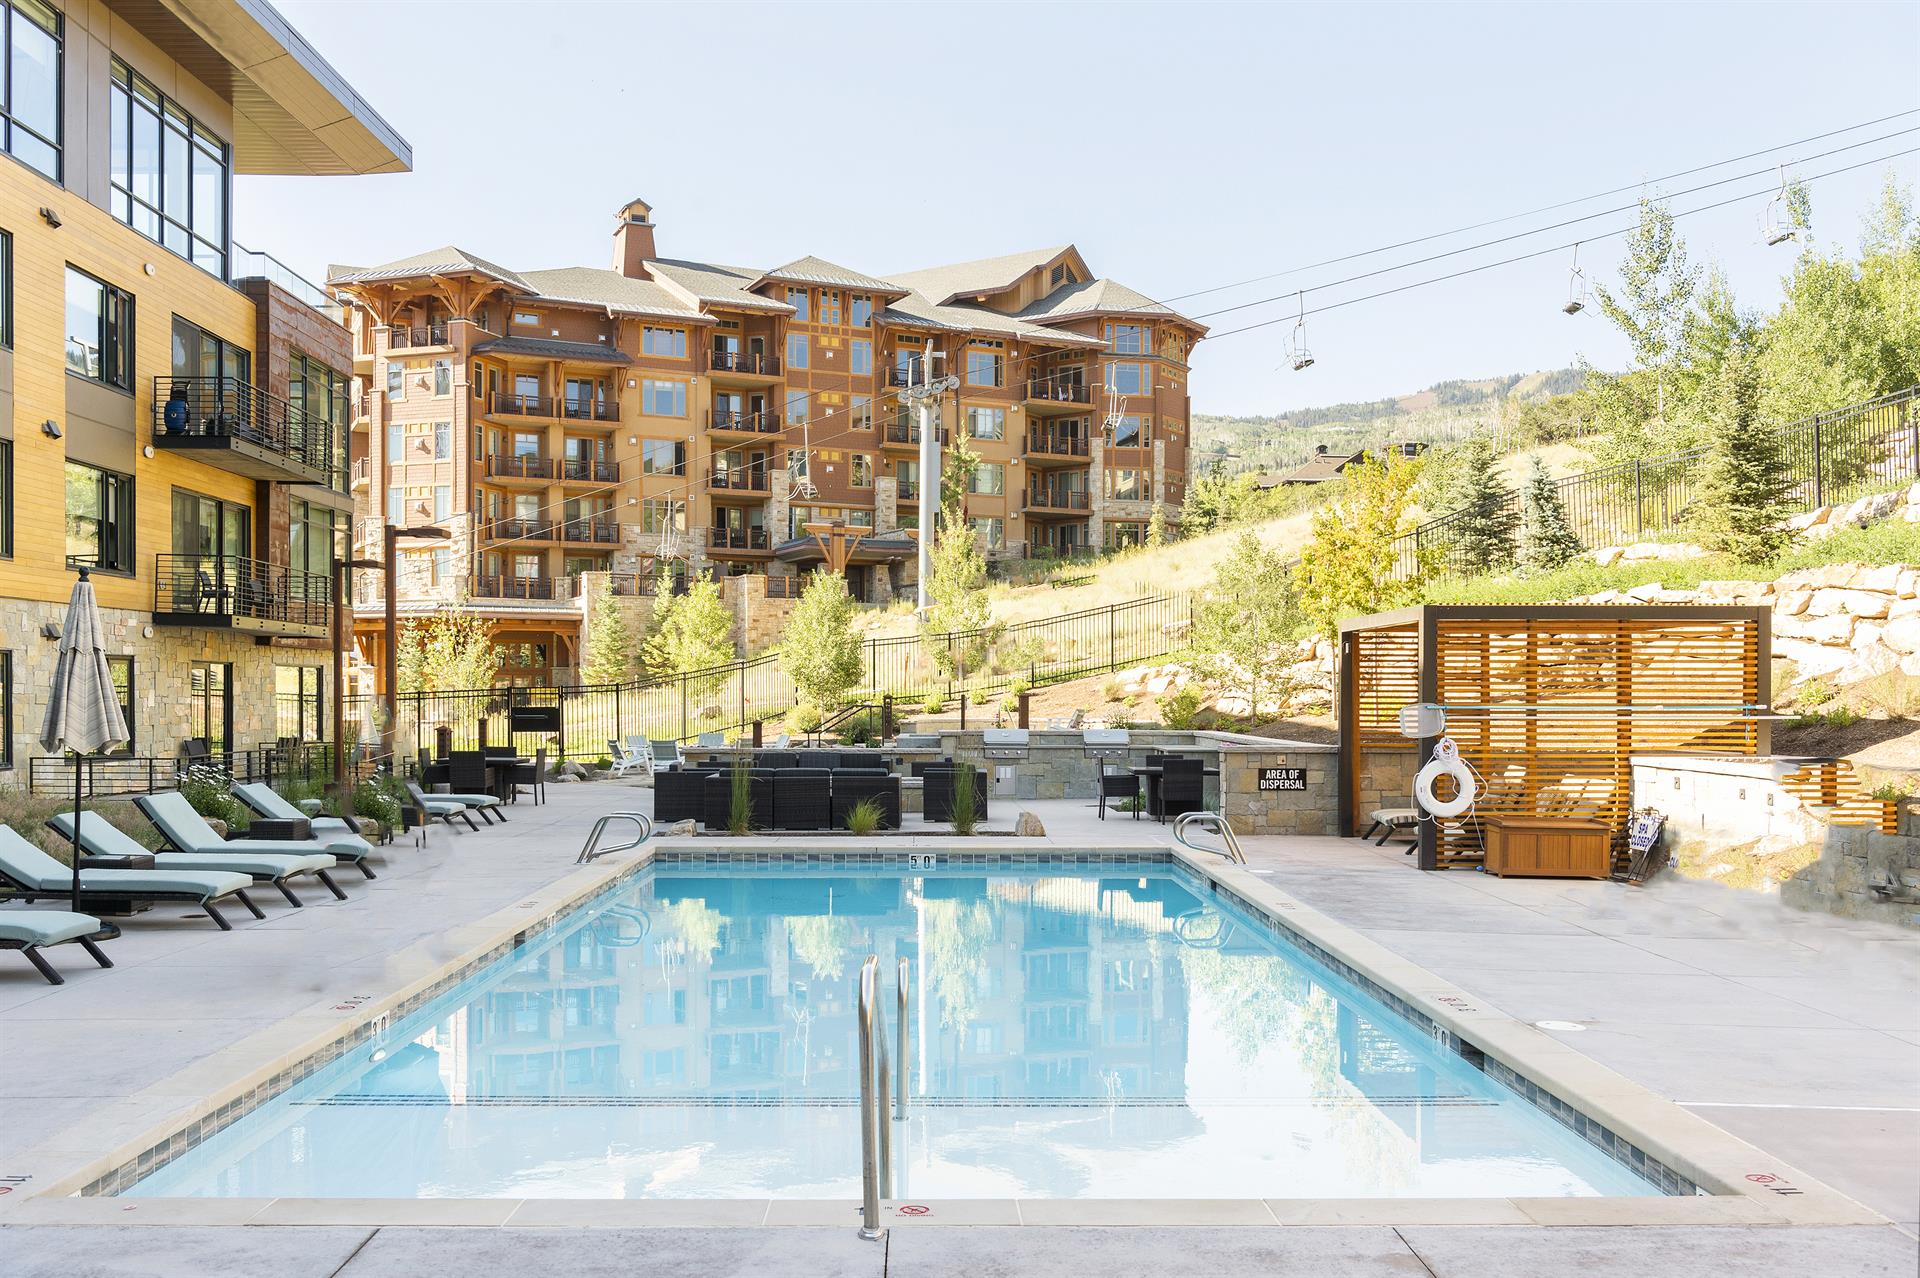 Beautiful pool at vacation rental at the Lift in the Canyons Village